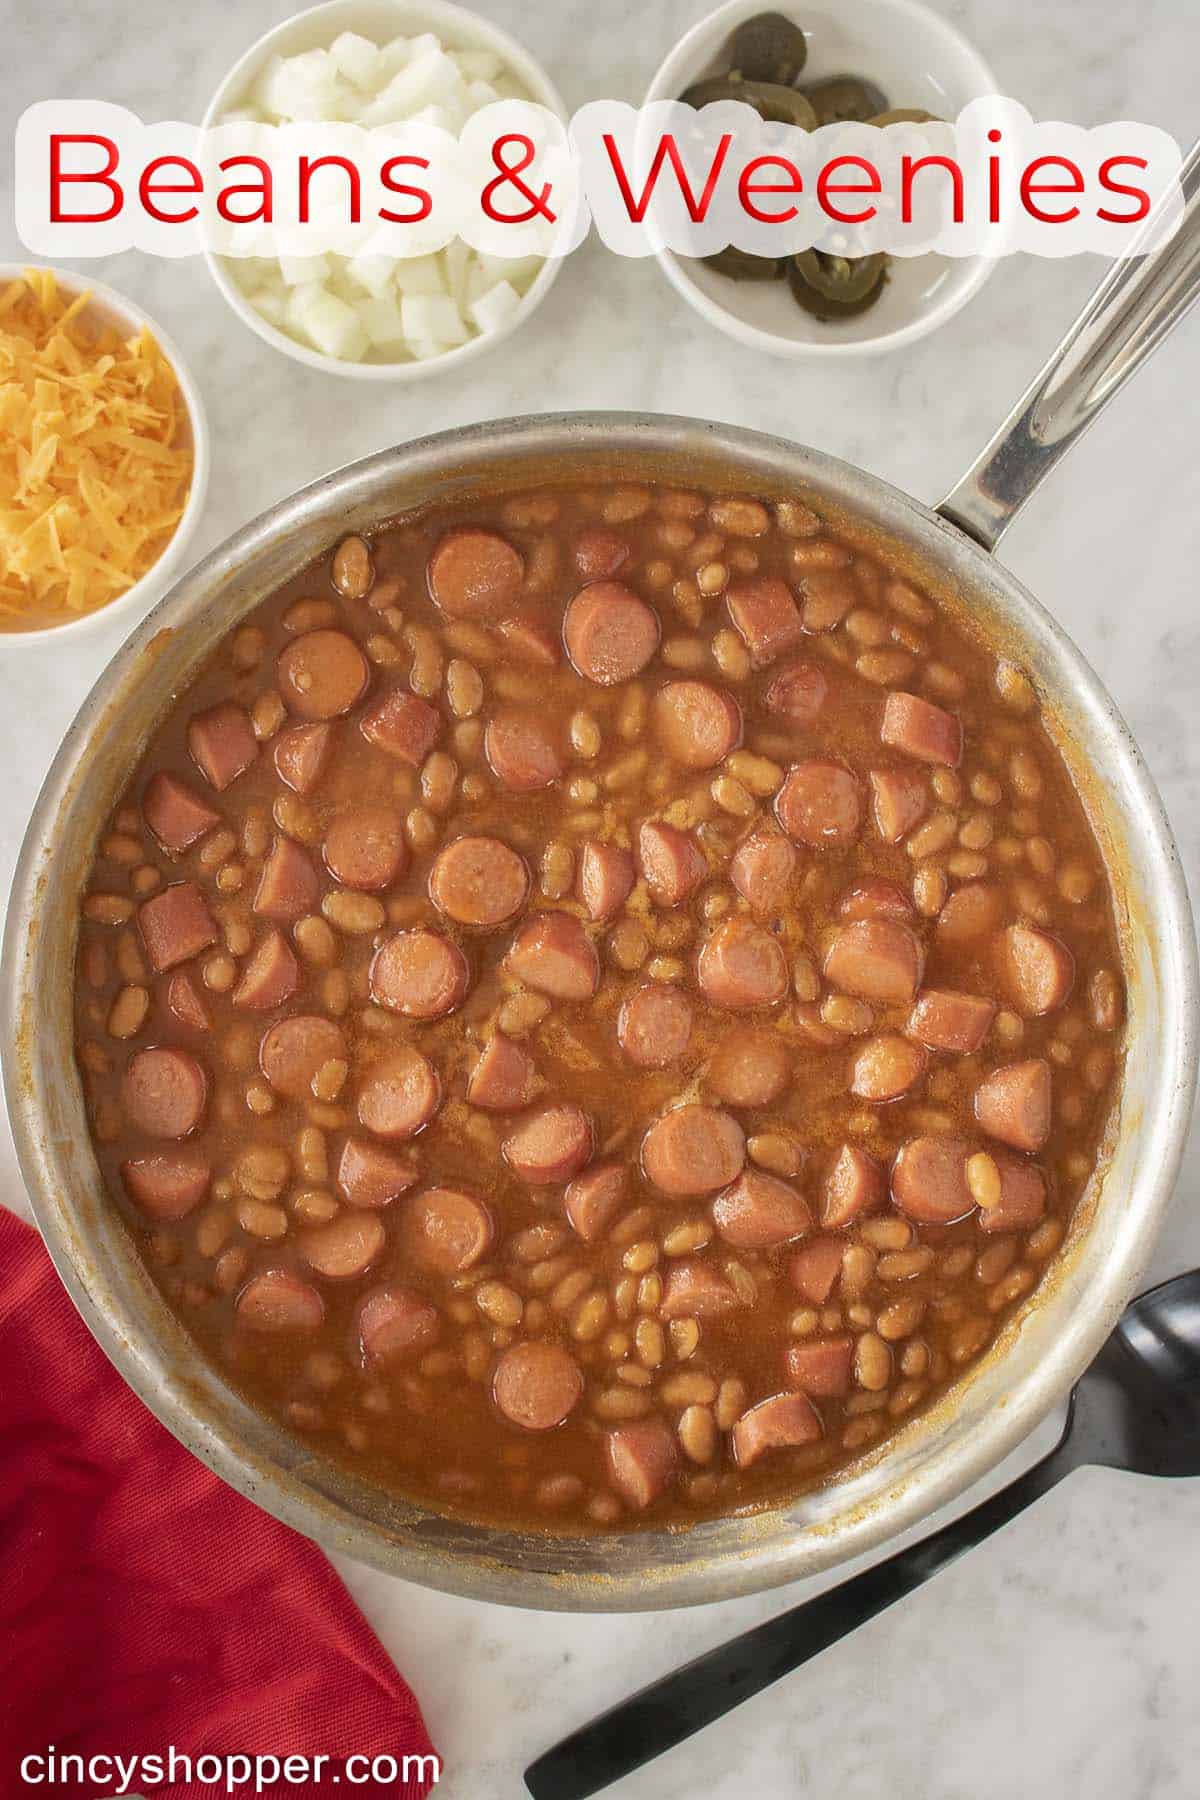 Text on image with Beans & Weenies